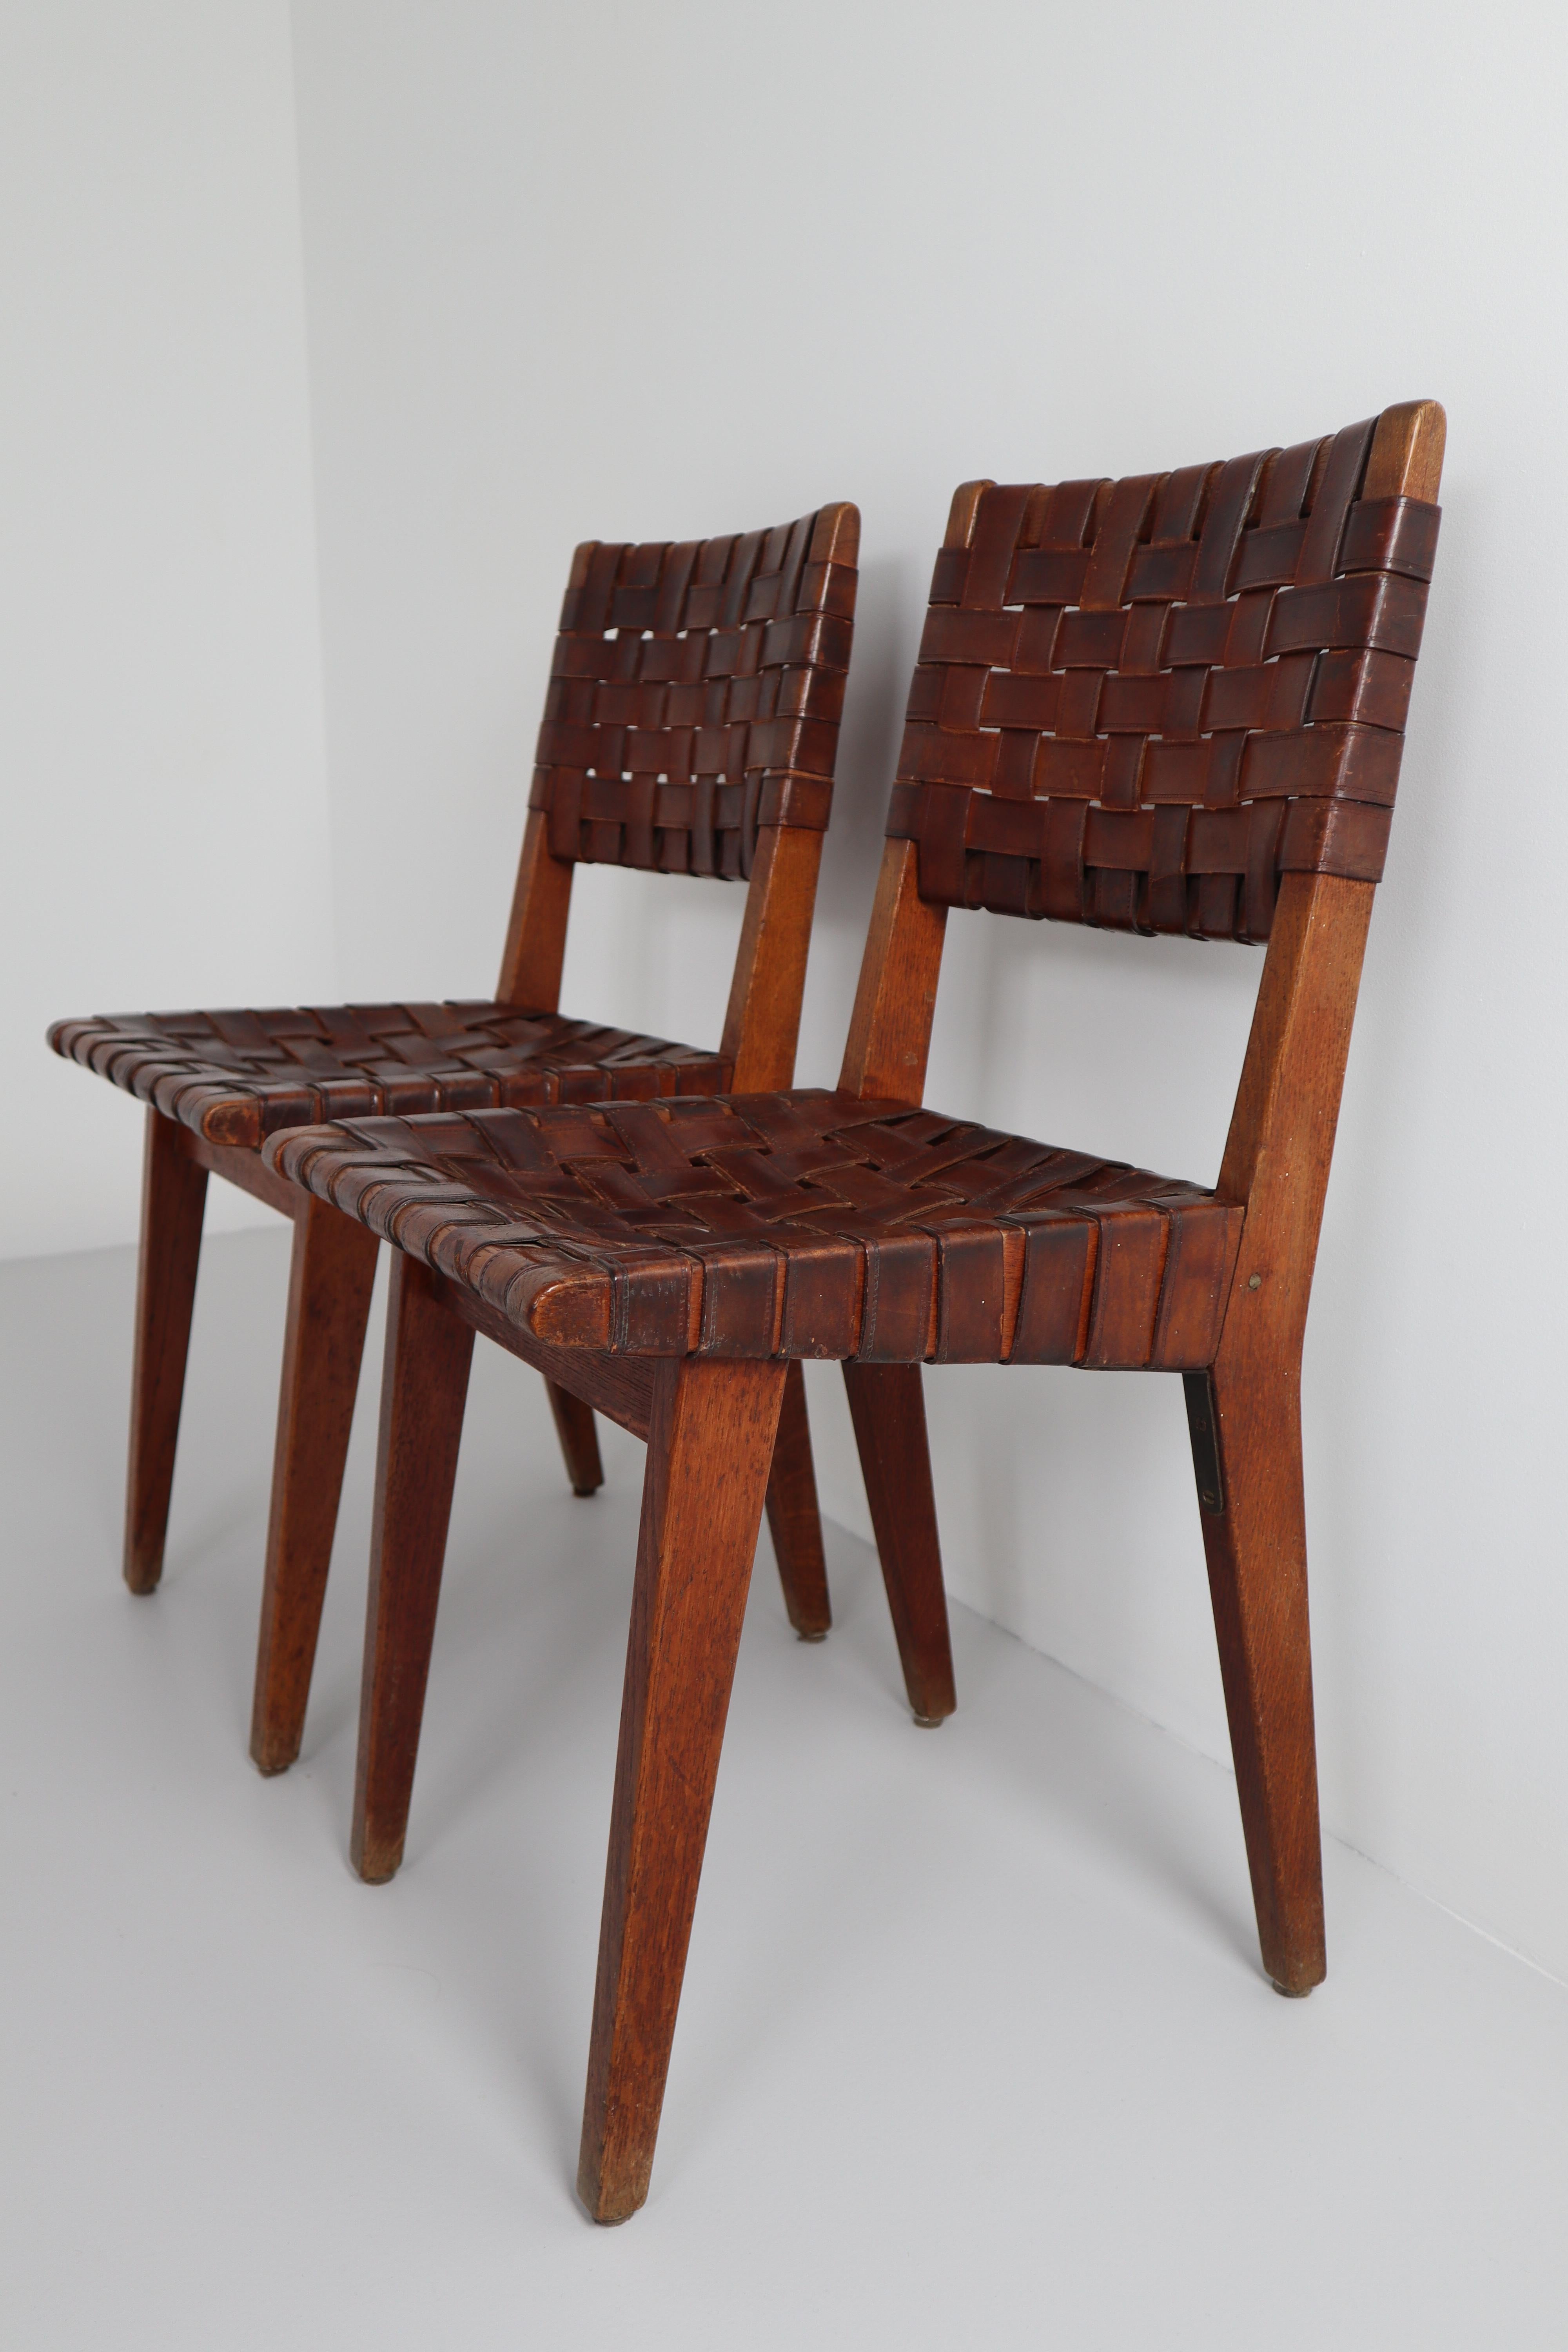 Early Woven Leather Side Chairs Model No. 666 by Jens Risom for Knoll, 1940s 2